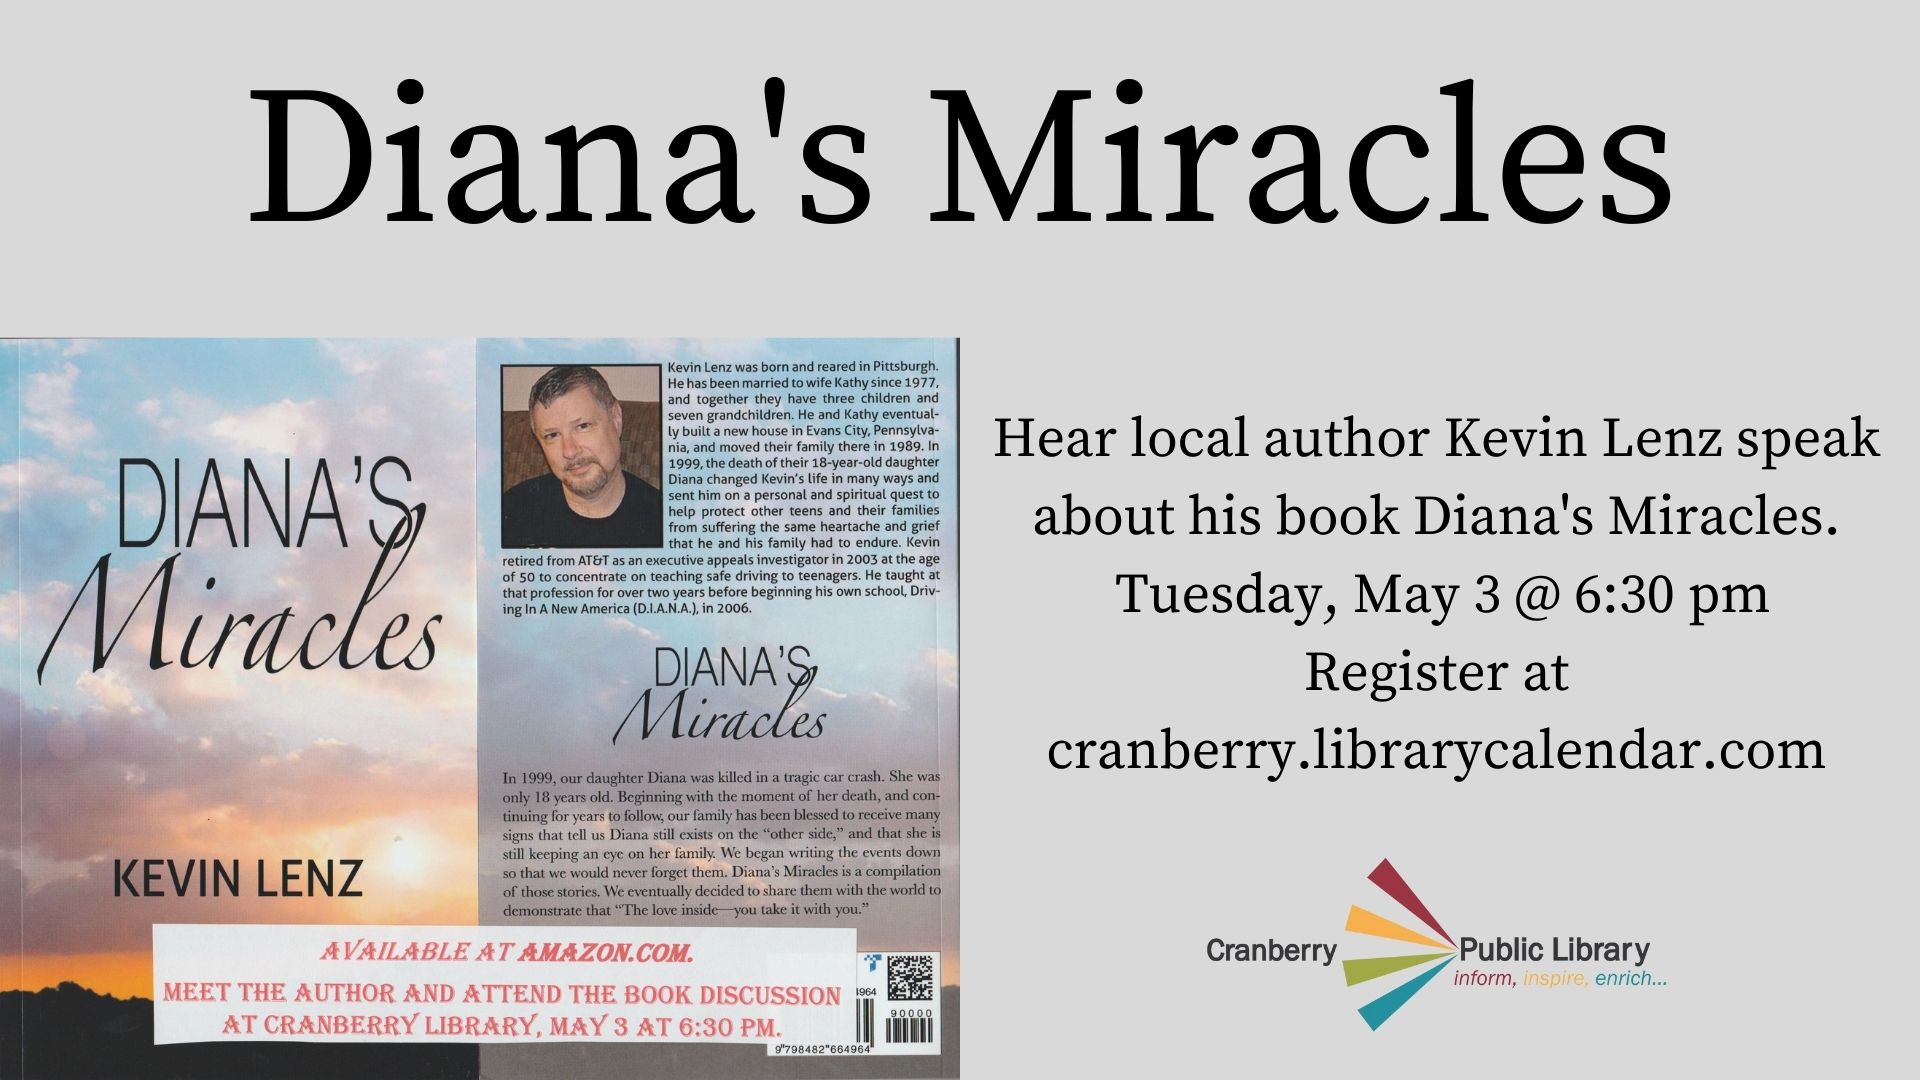 Flyer for Diana's Miracles program